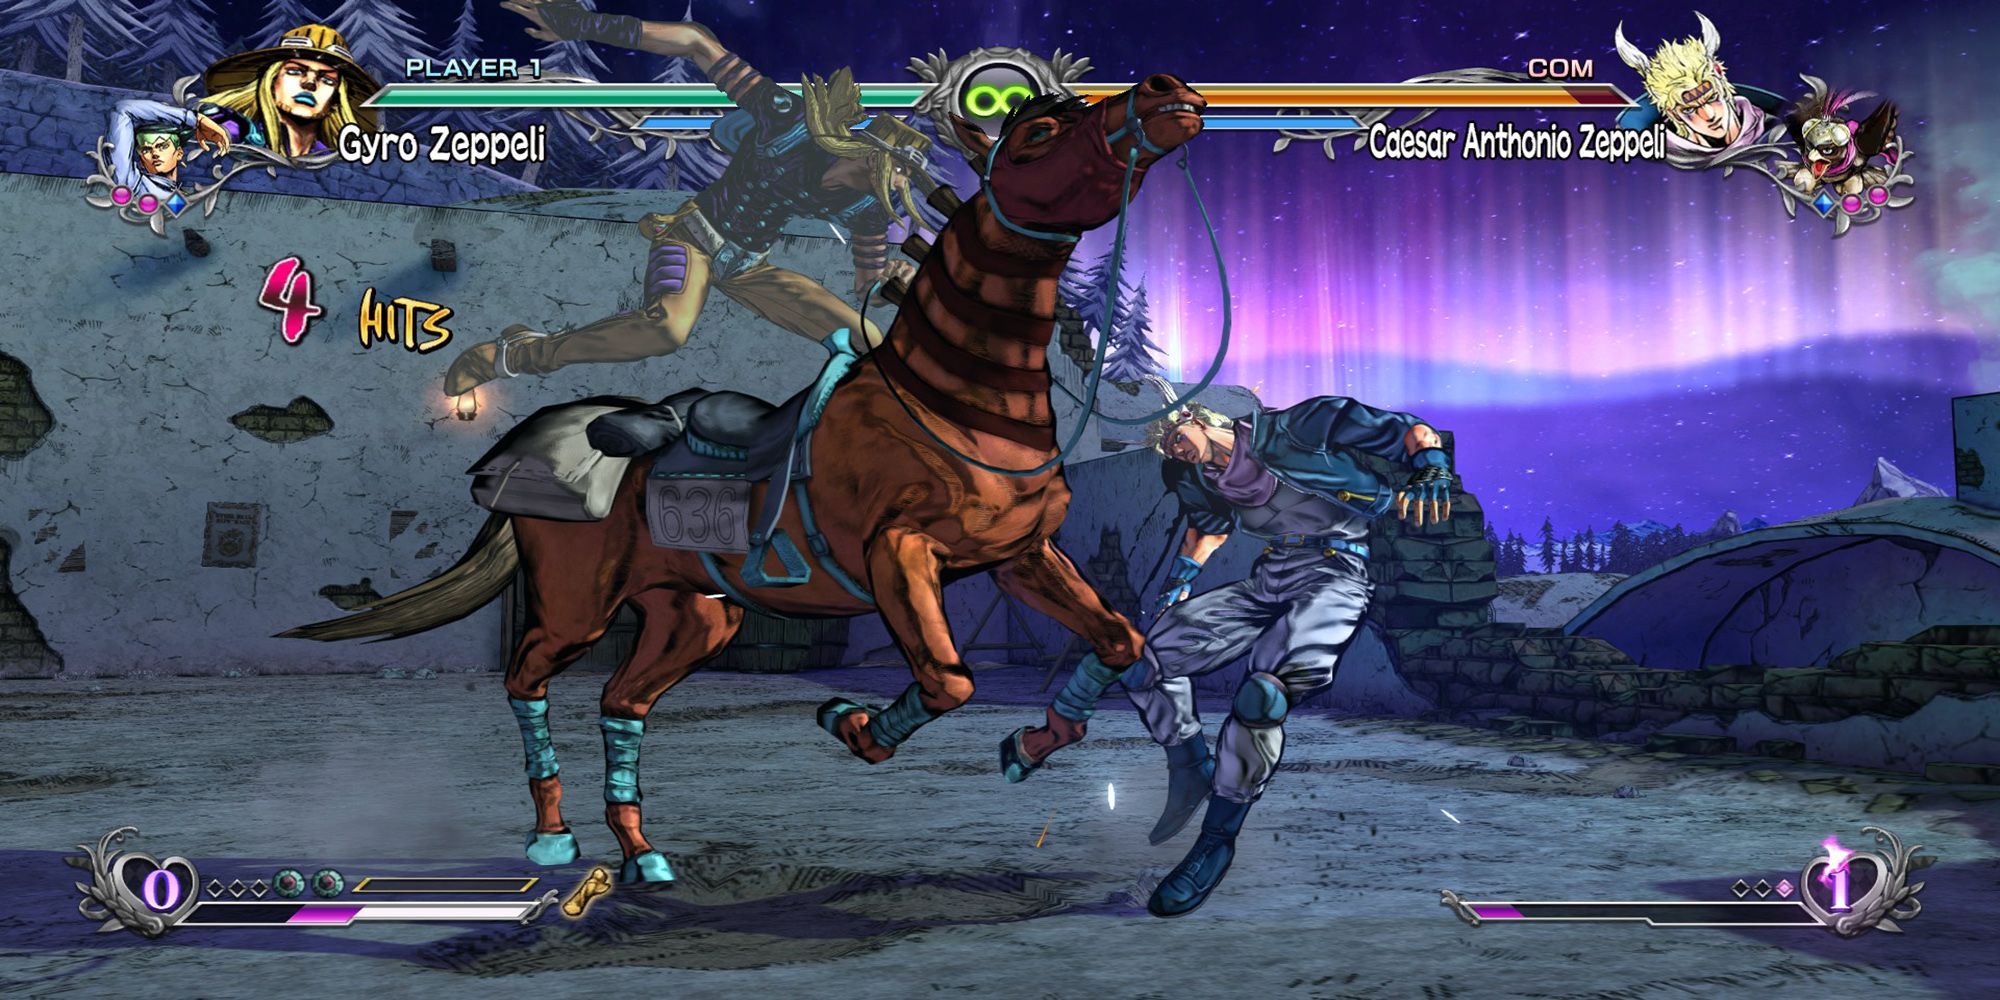 Gyro quickly mounts his horse in the middle of attacking Caesar in the Rocky Mountain Village in JoJo's Bizarre Adventure ASBR.